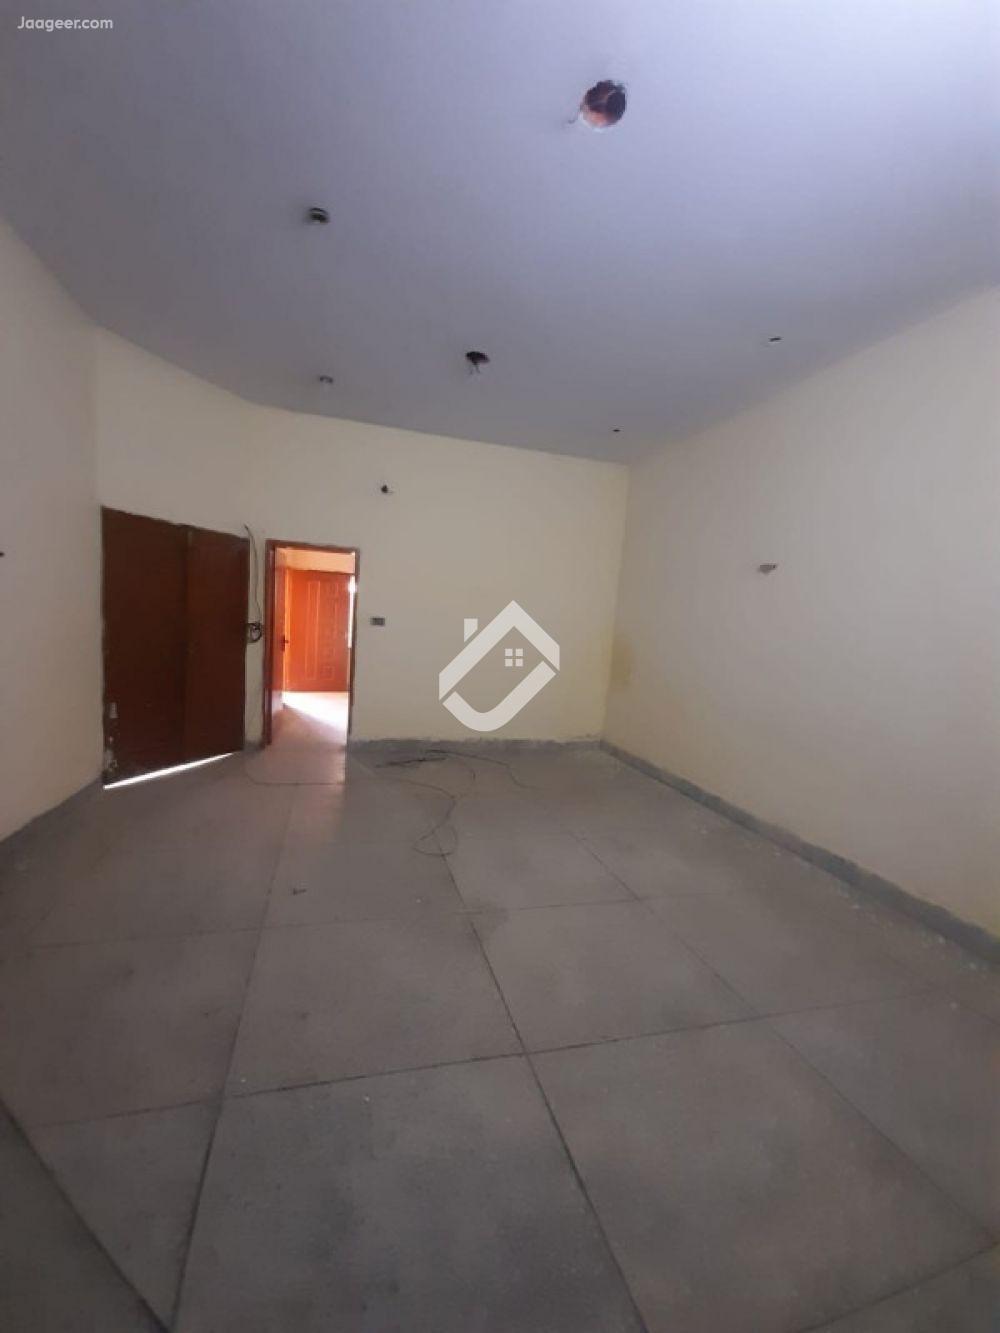 View  5 Marla Lower Portion House For Rent In Cheema Colony  in Cheema Colony, Sargodha